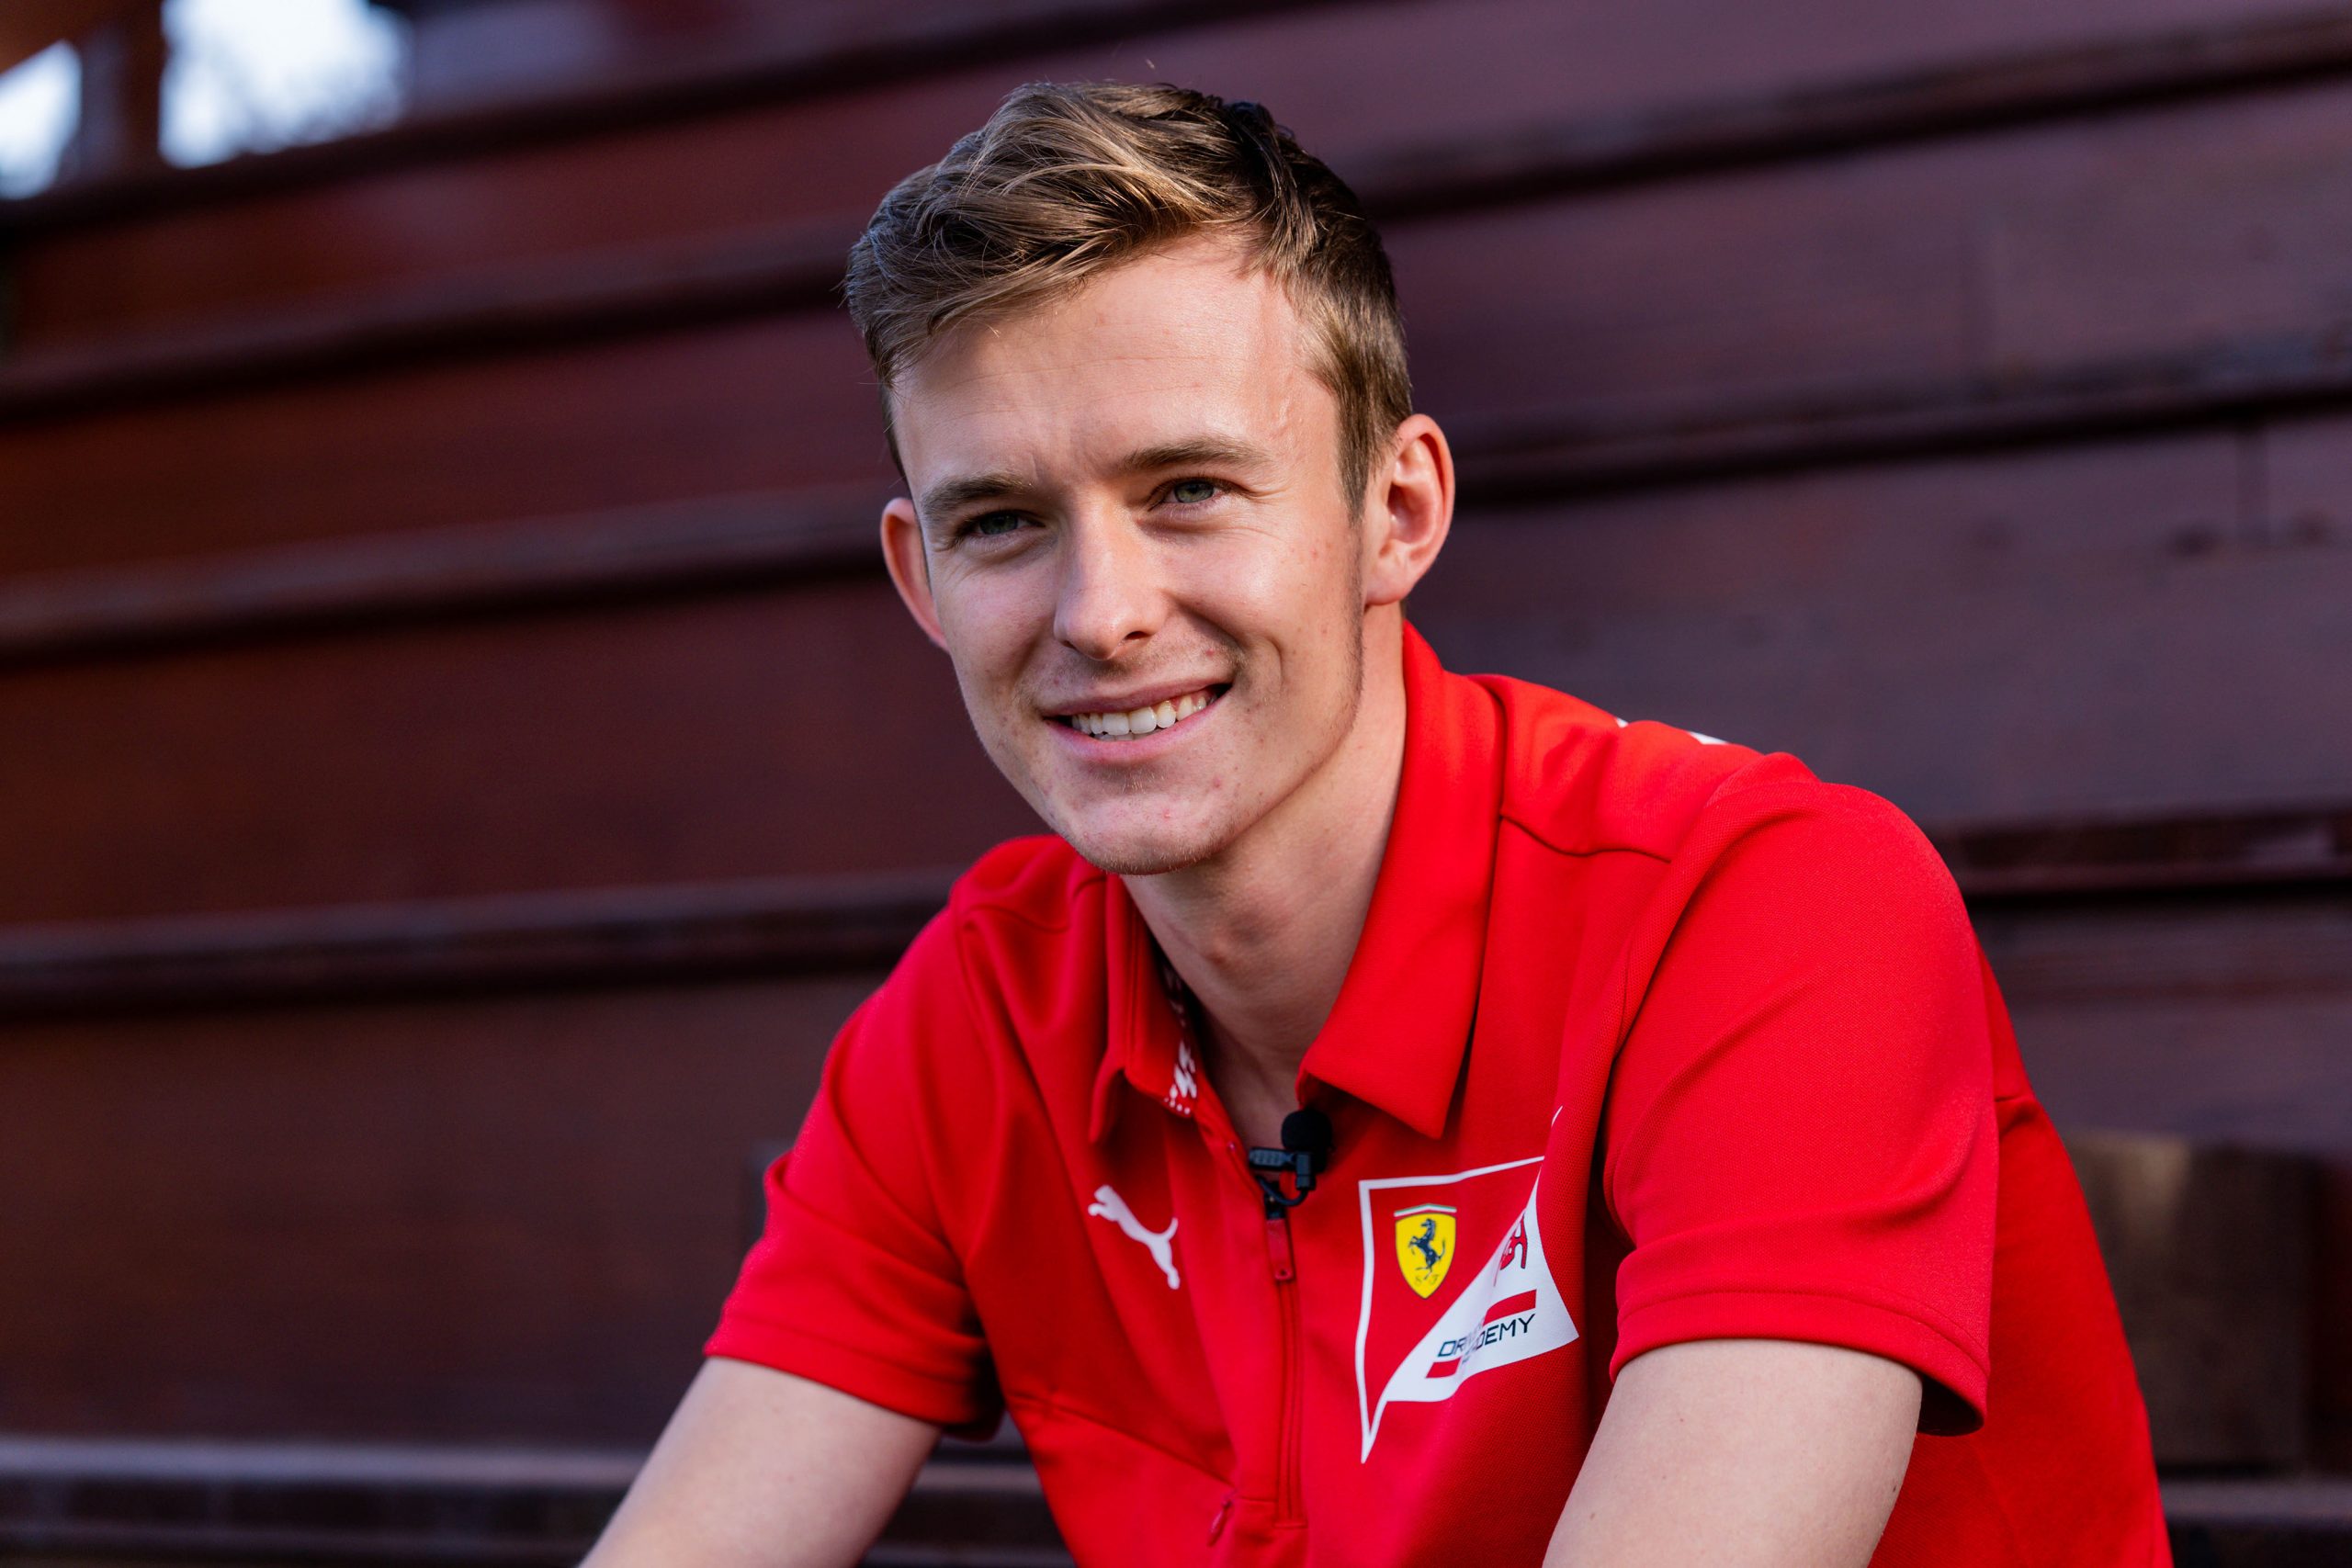 Ilott will be getting practice outings with Ferrari in 2021